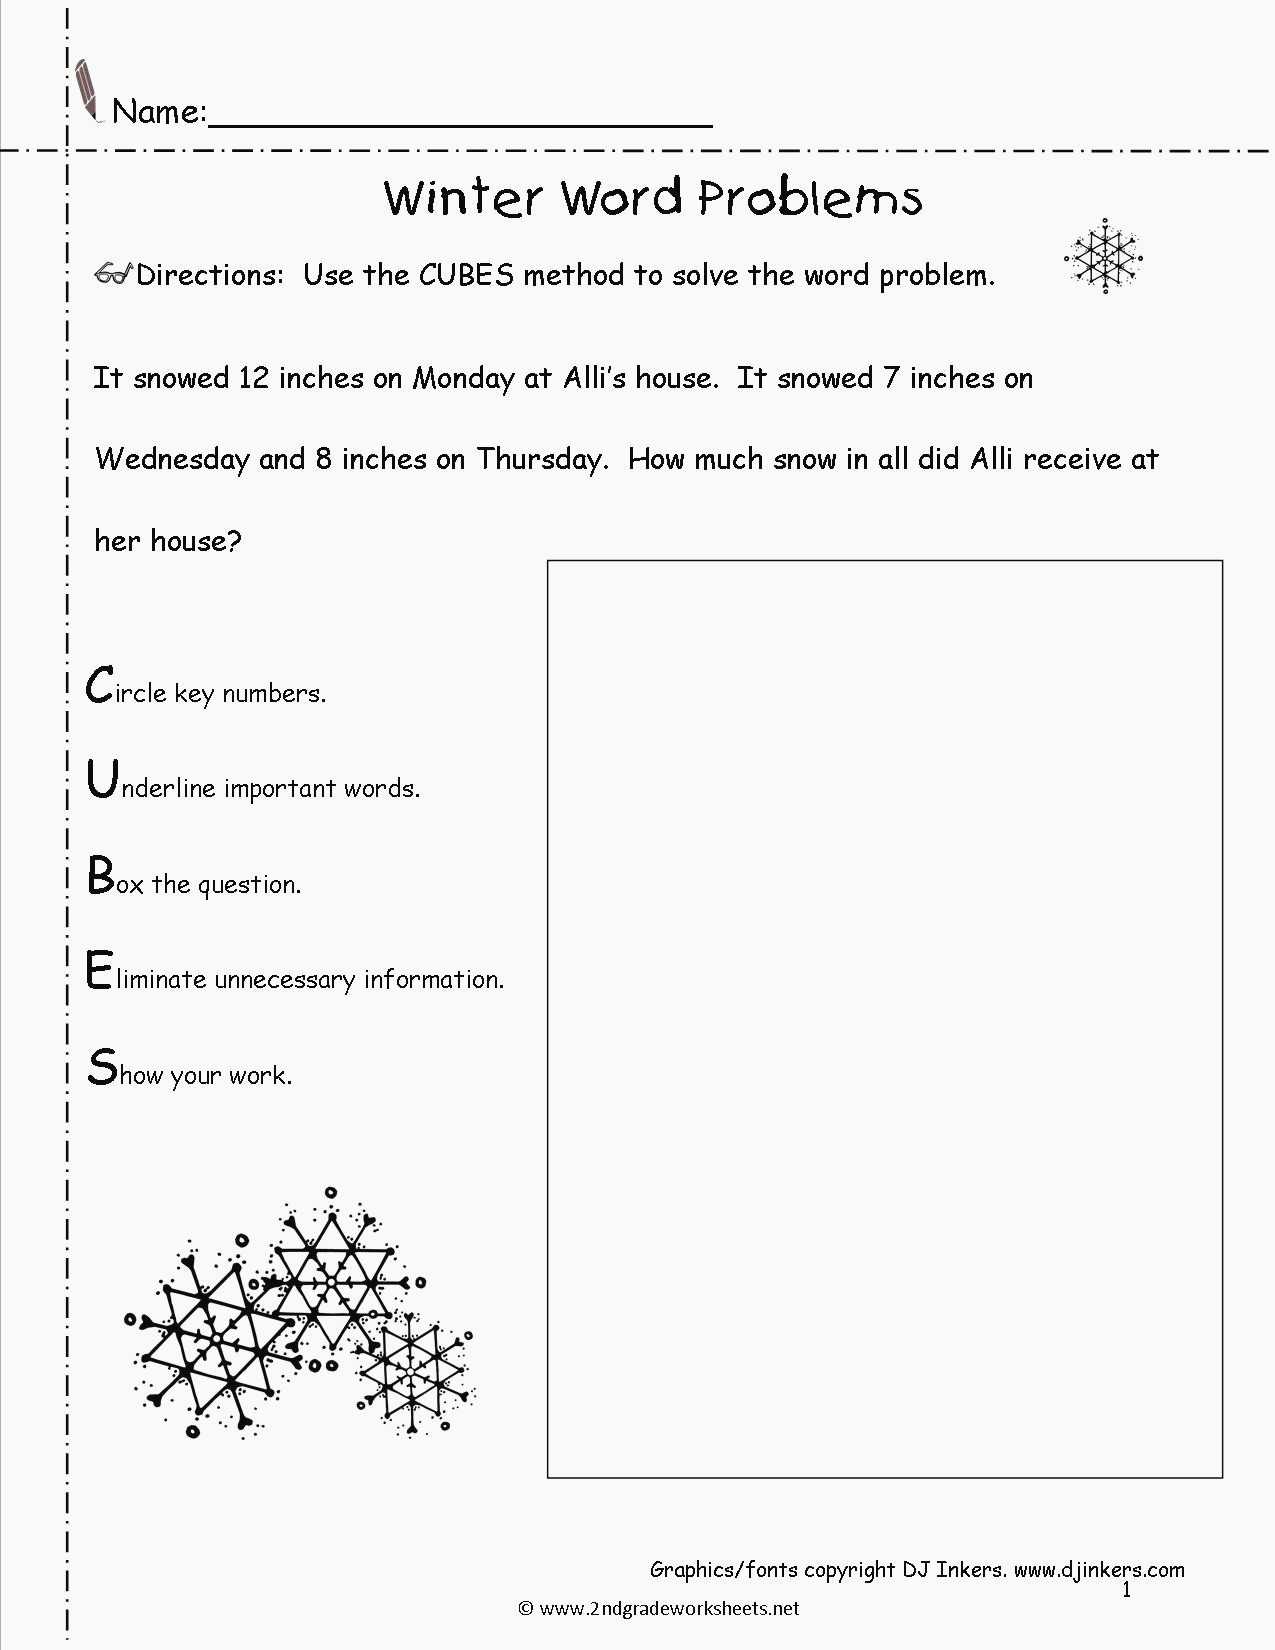 Executive Functioning Worksheets together with Science Worksheets Second Grade Wp Landingpages